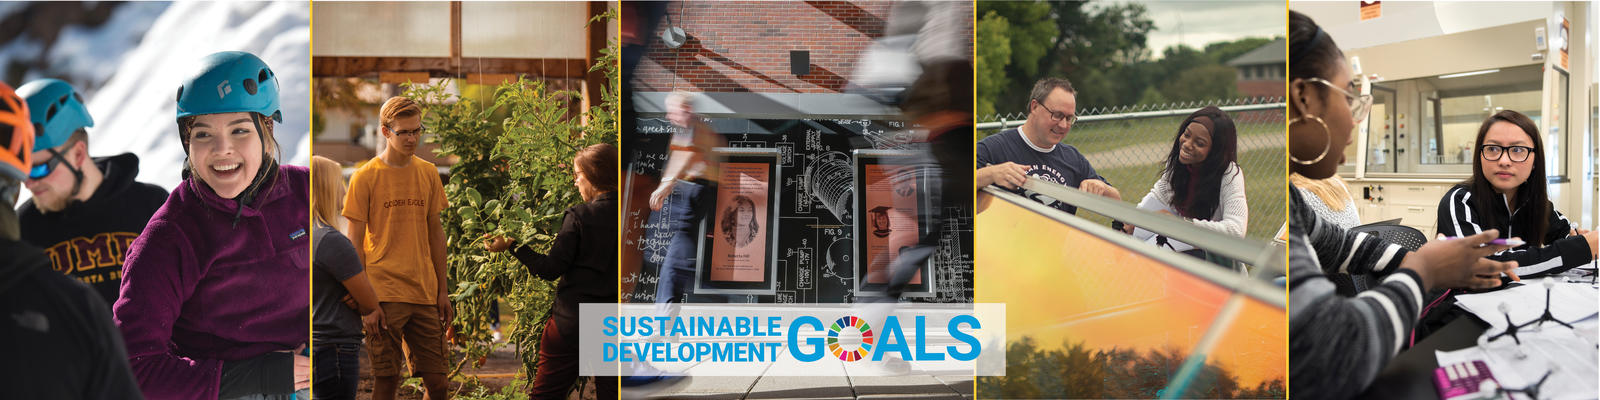 1 image from each UMN campus with SDG logo. 